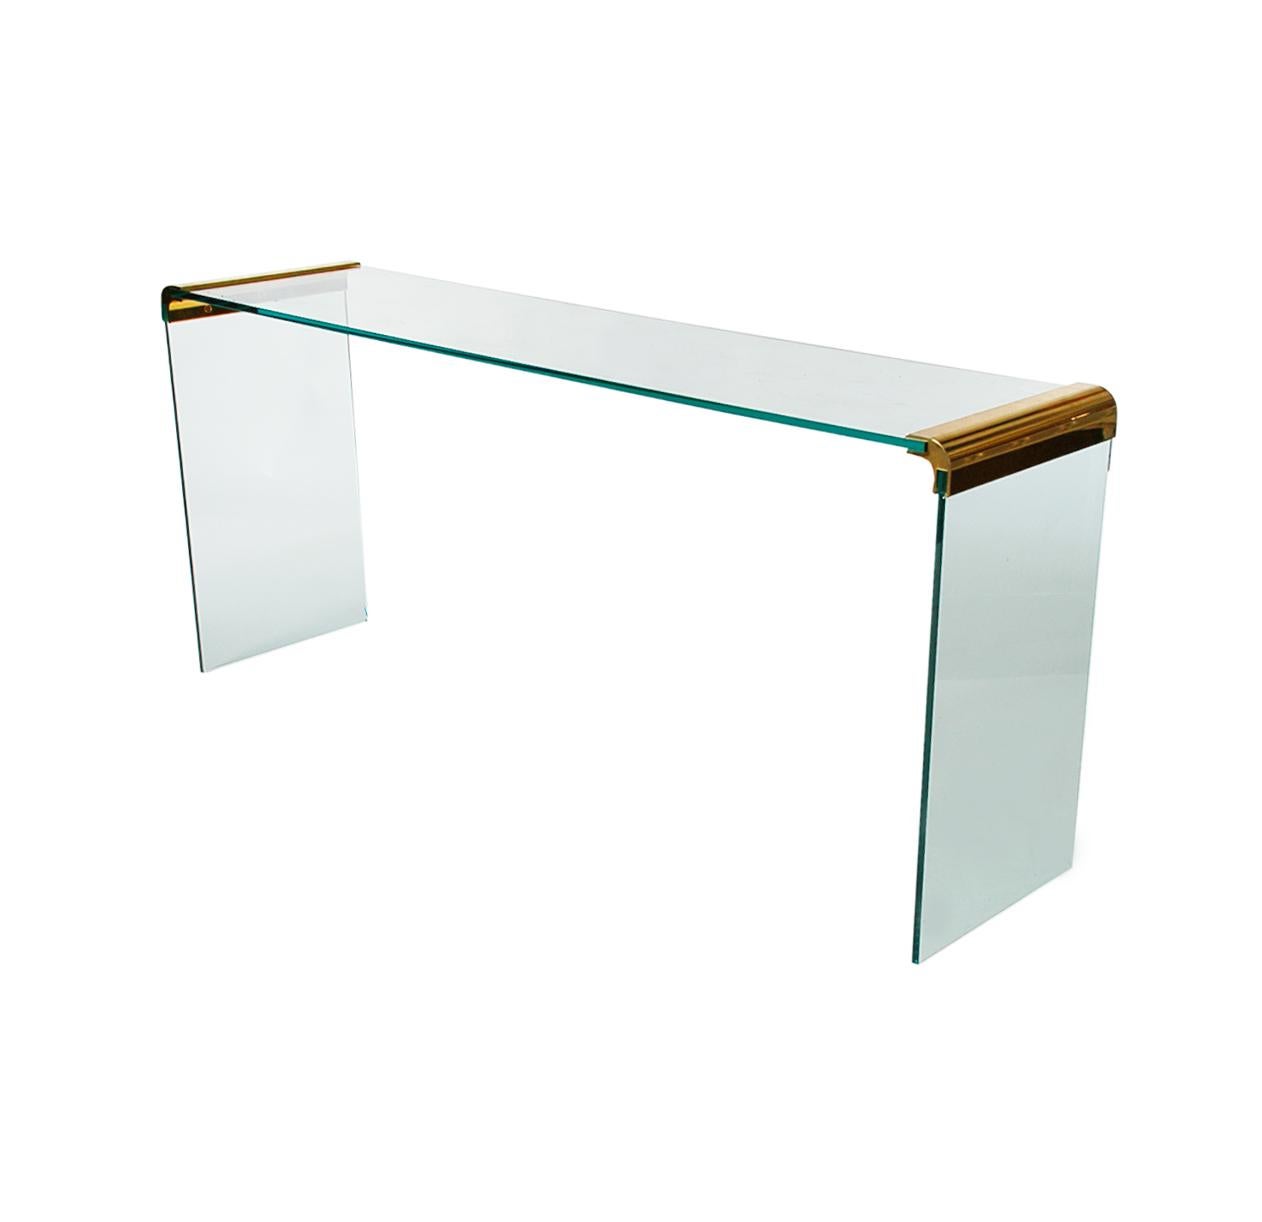 American Mid-Century Modern Brass and Glass Console or Sofa Table by Leon Rosen for Pace